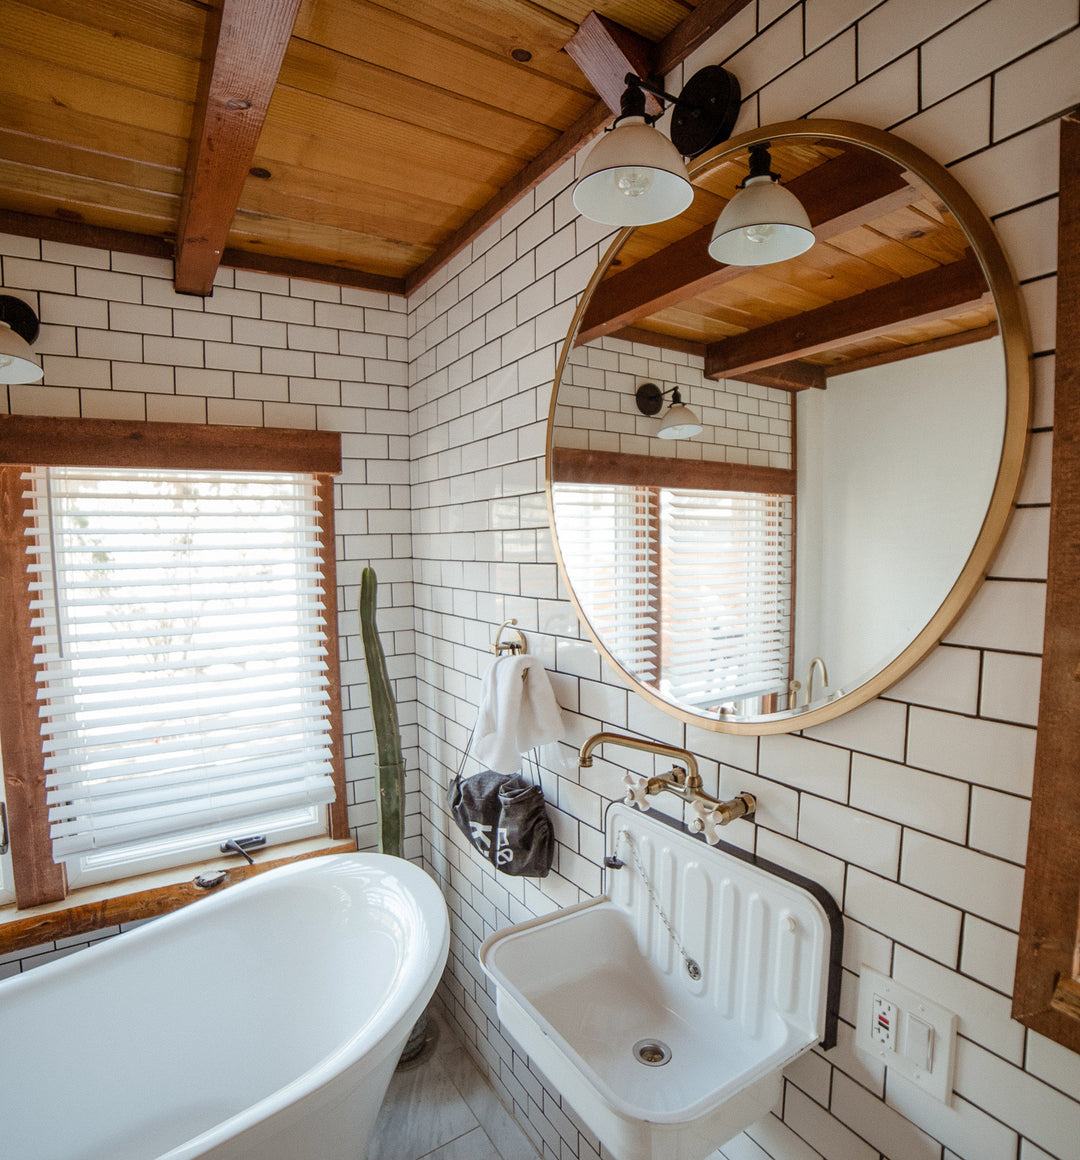 5 Things You Shouldn't Be Keeping in Your Bathroom (And Two You Should)